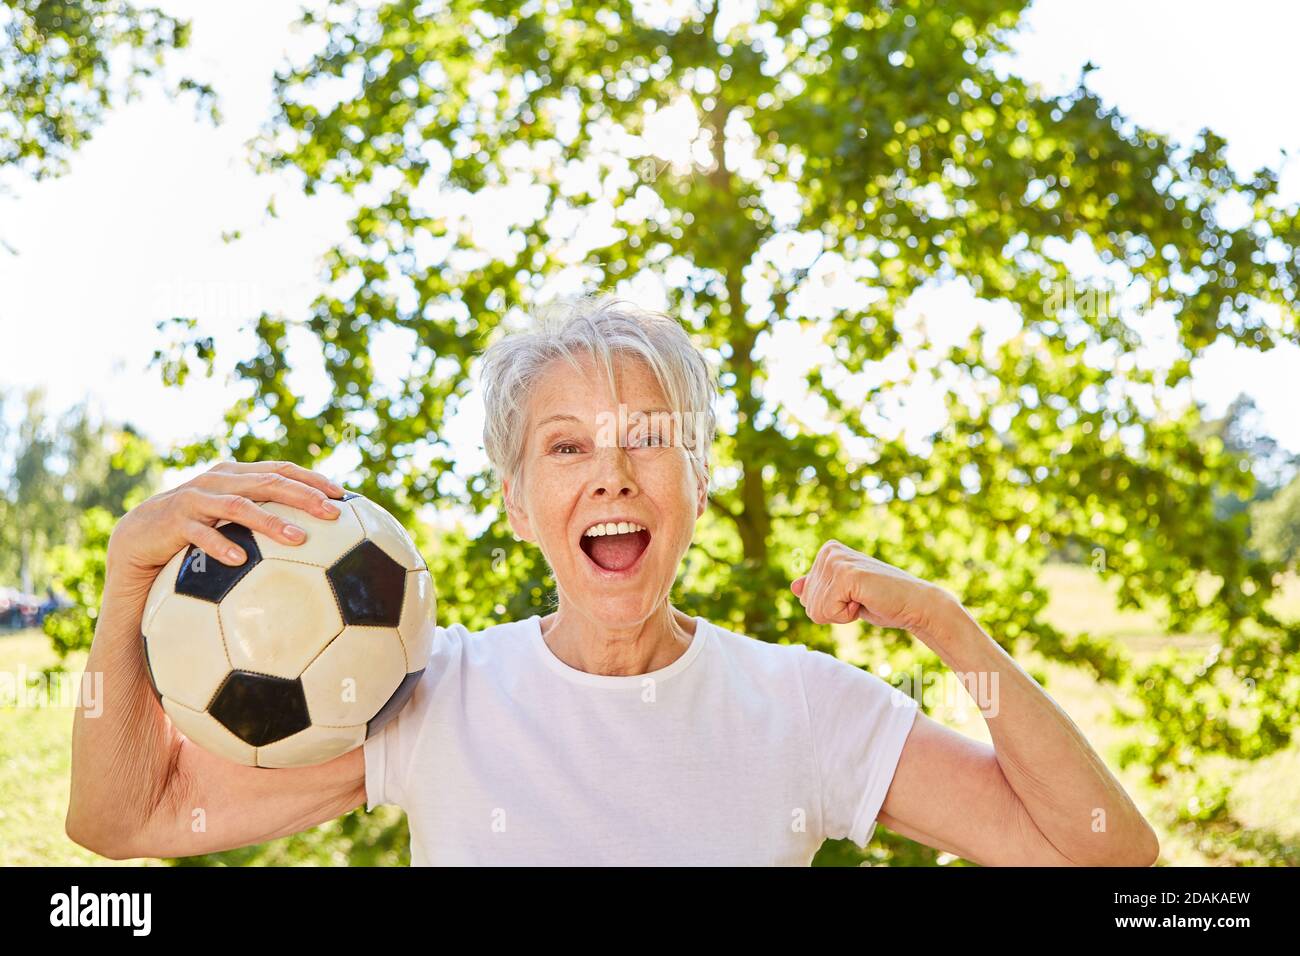 Vital senior woman with soccer ball cheers with clenched fists as the winner after a game Stock Photo